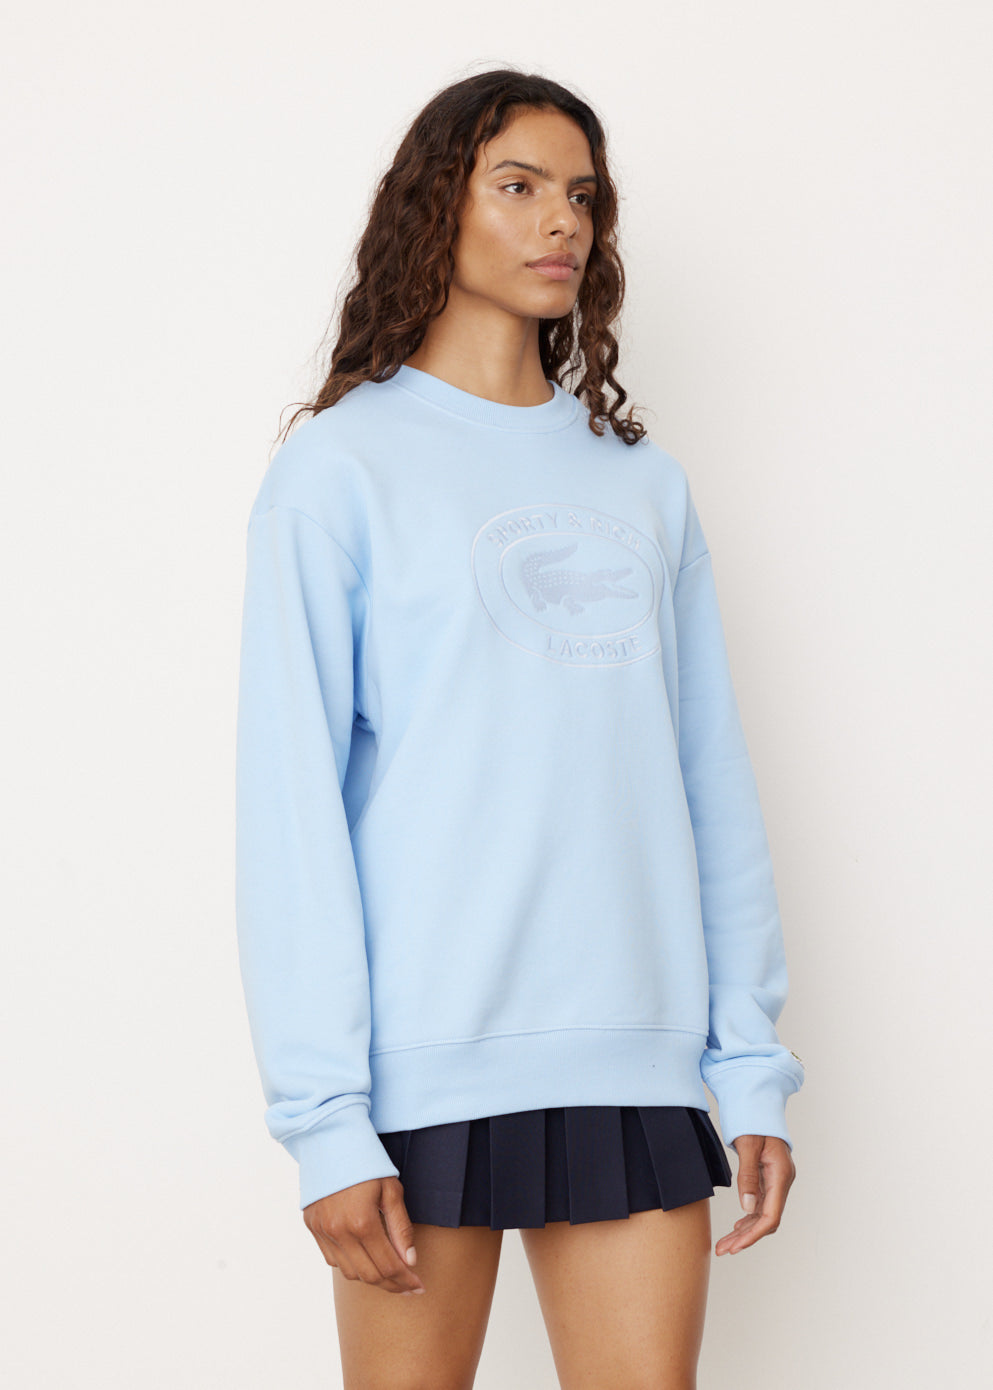 x Lacoste Oval Logo Embroidered Crewneck